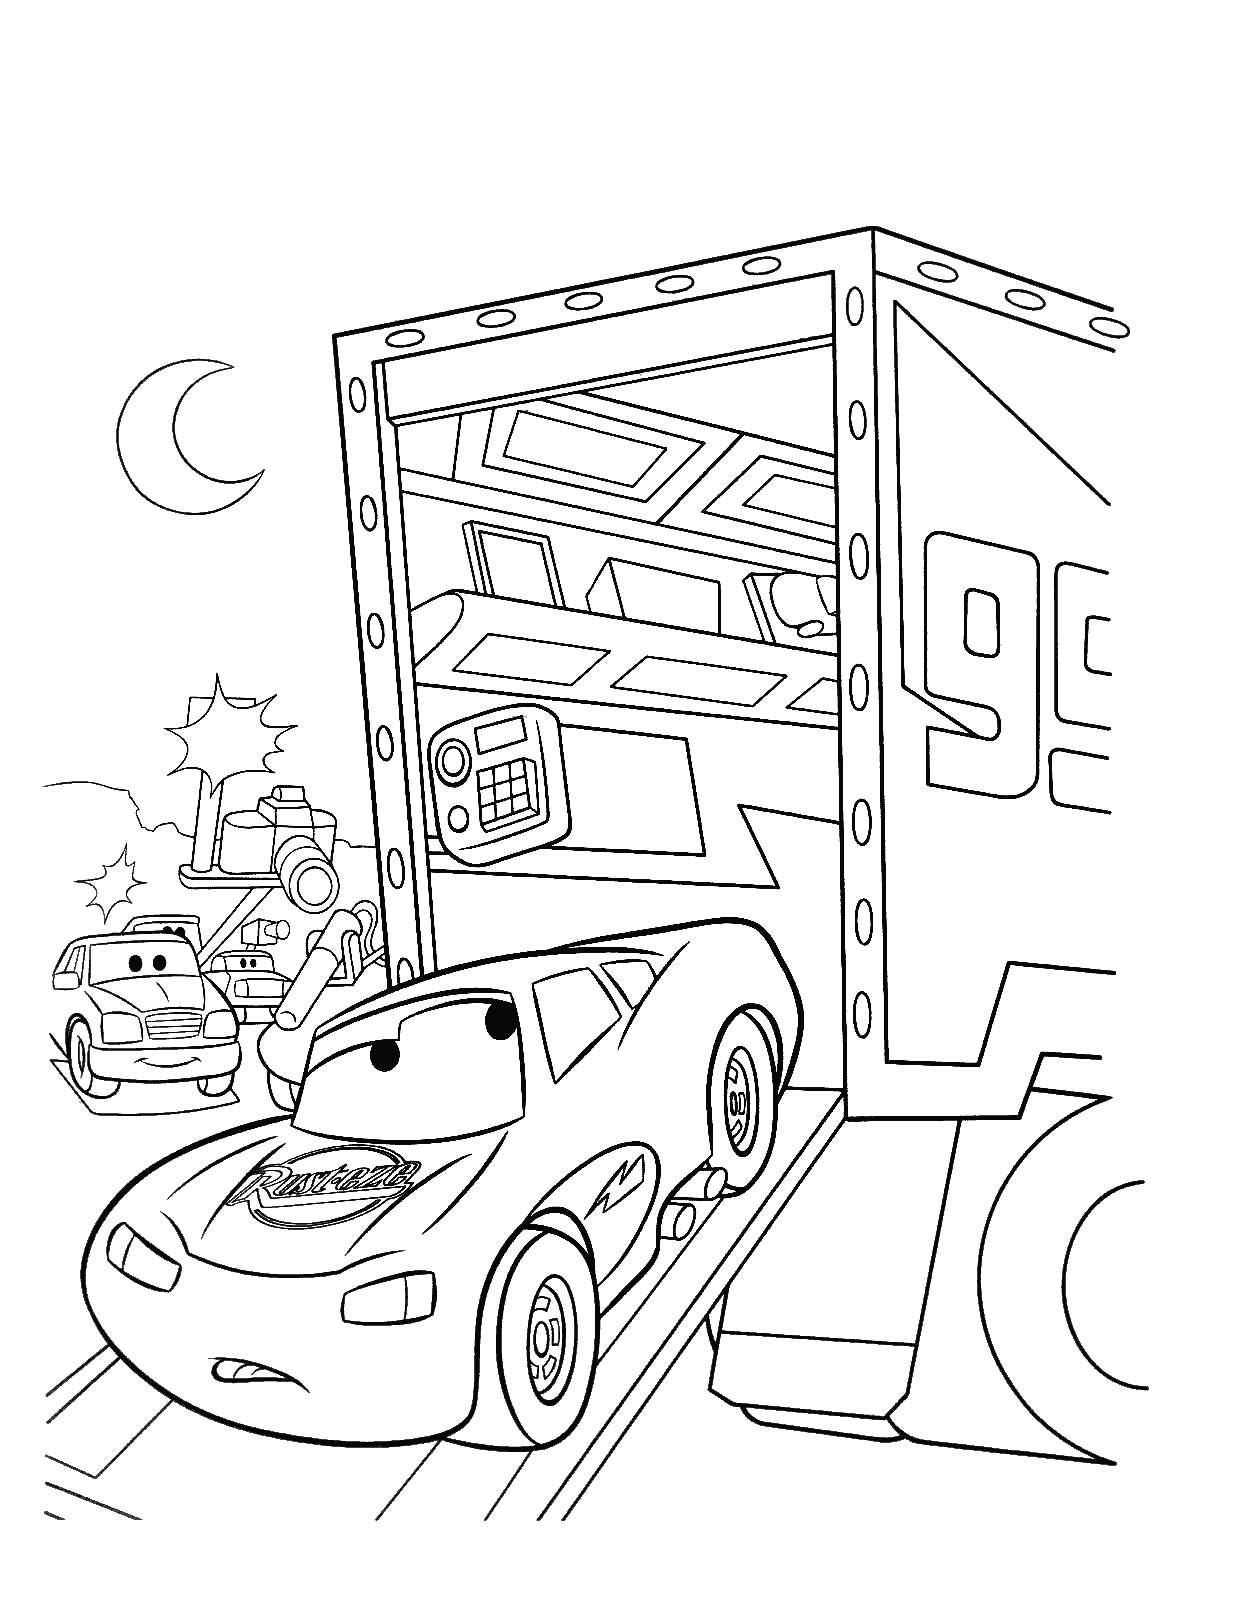 Free Printable Lightning Mcqueen Coloring Pages For Kids Best Coloring Pages For Kids Lightning mcqueen coloring pages for kids lightning mcqueen coloring book songs for kids learning vi. free printable lightning mcqueen